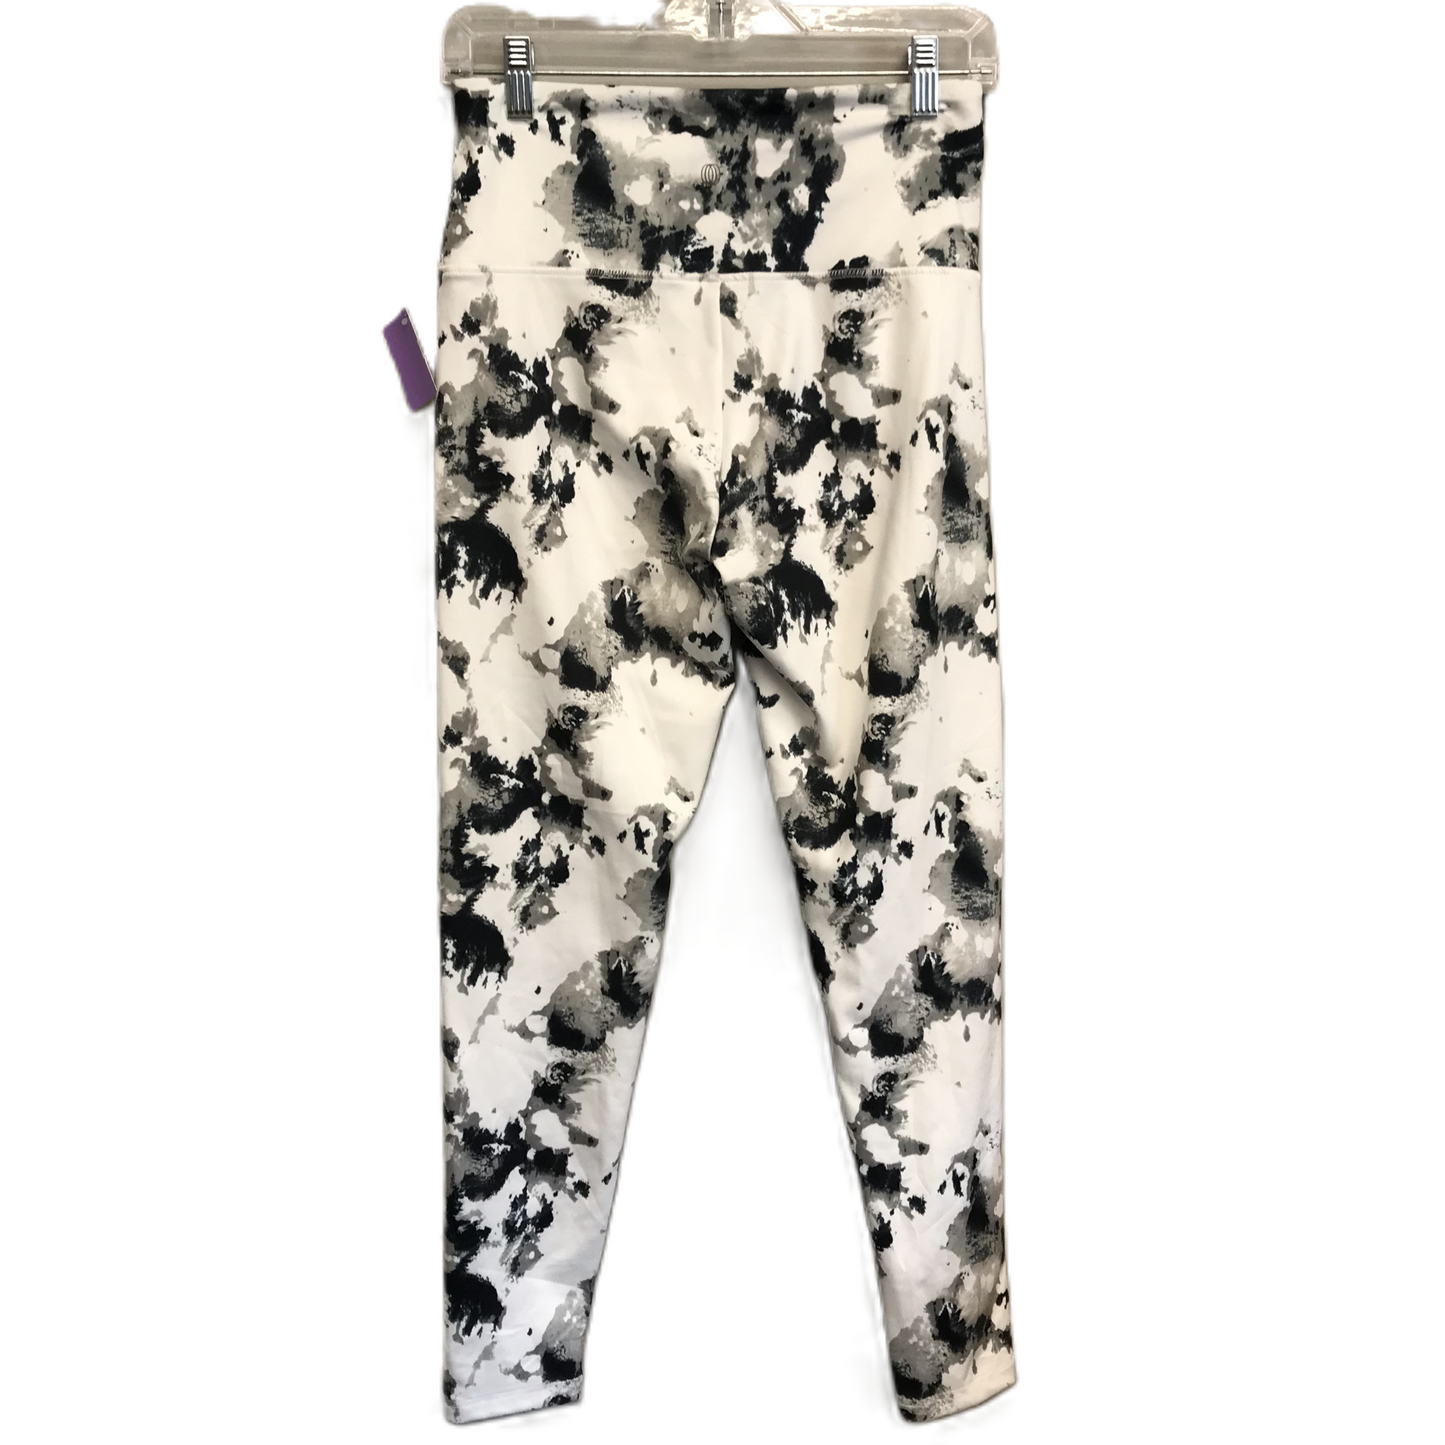 Black & White Athletic Pants By Balance Collection, Size: L